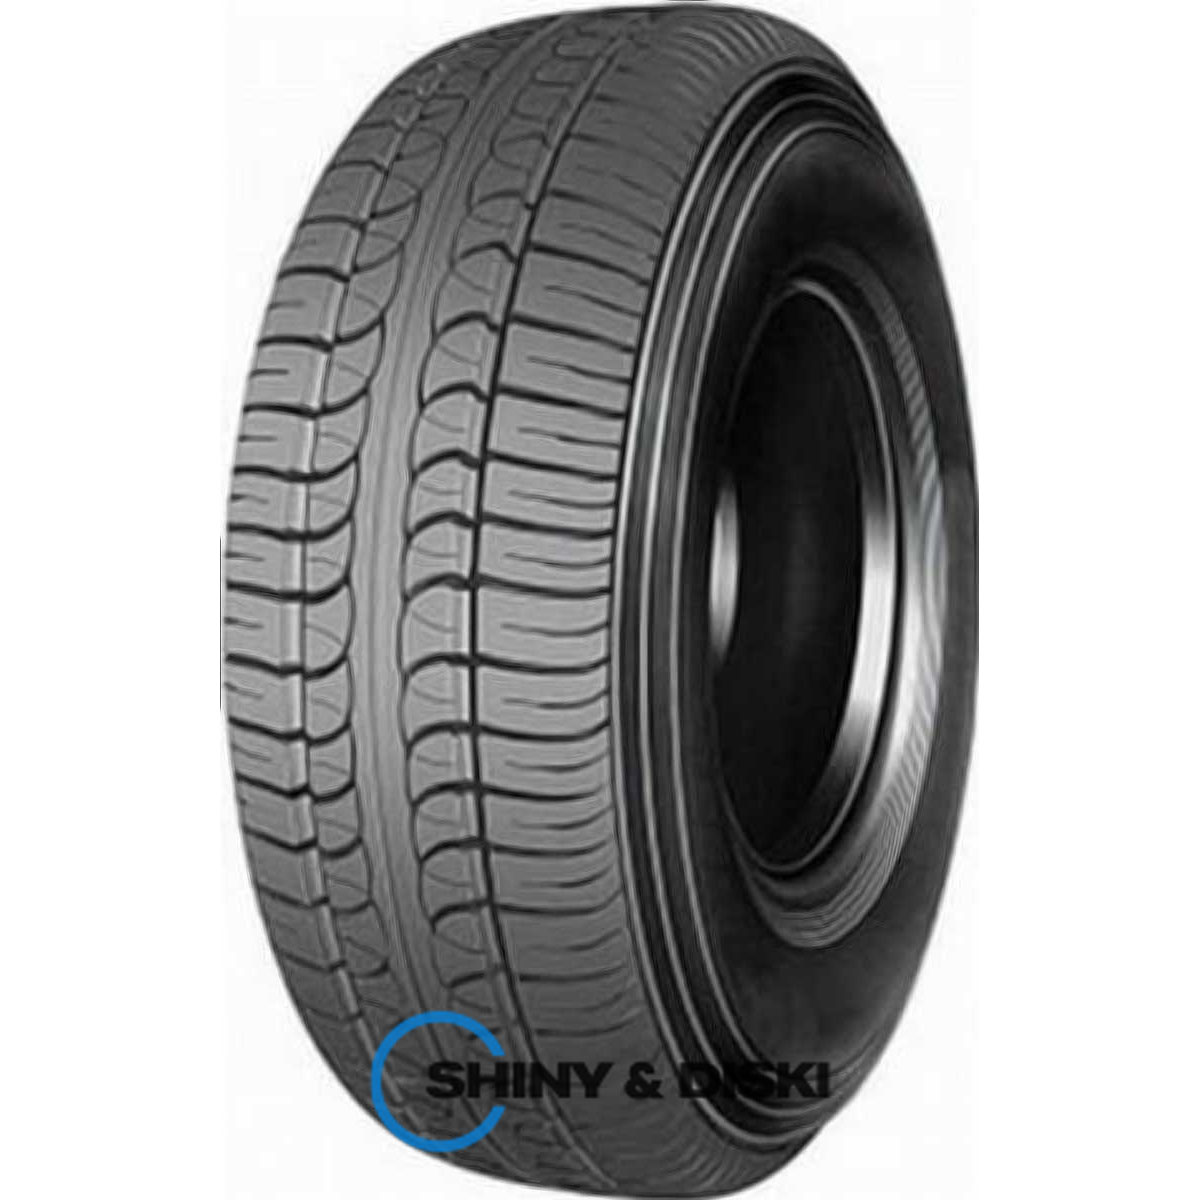 infinity inf-030 165/70 r14 81t